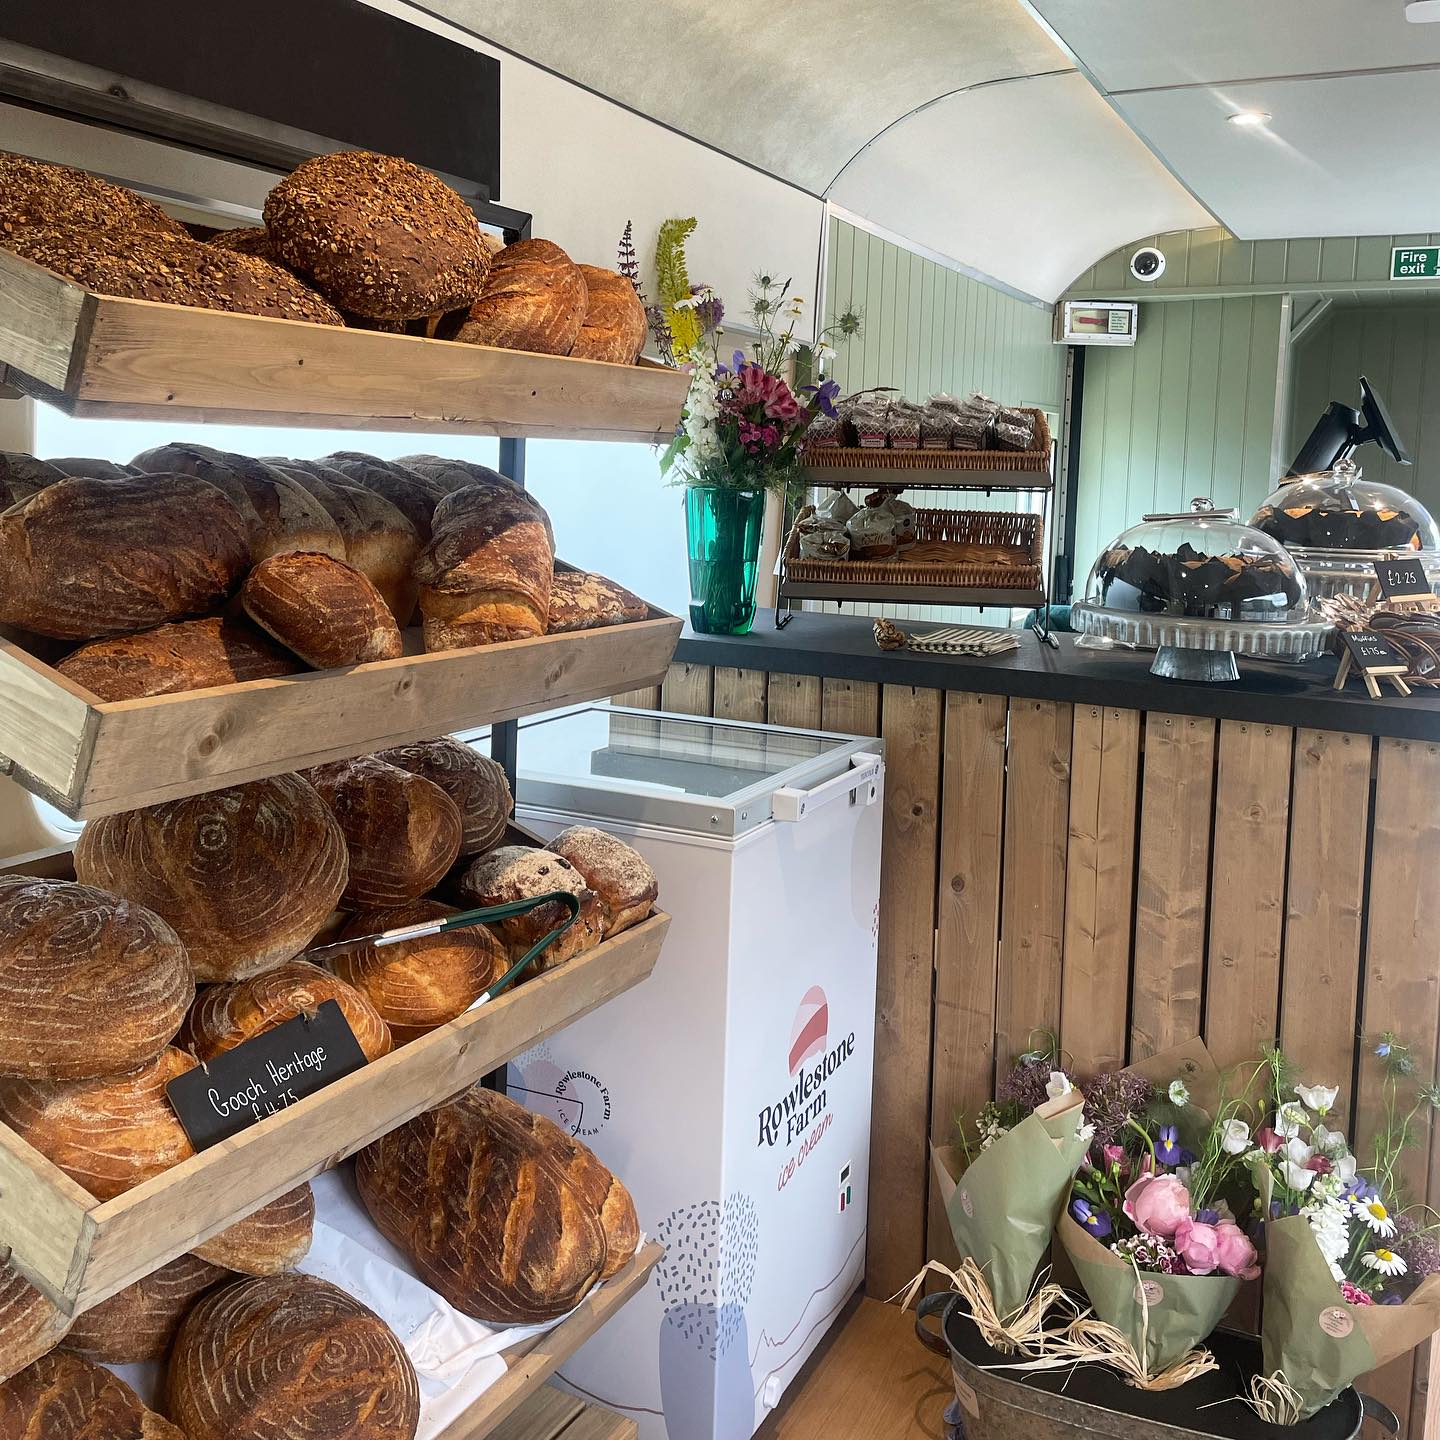 FEATURED | Have you visited The Sidings at Carriages in Herefordshire? A stunning Farm Shop and Cafe that’s just a few miles from Hereford!